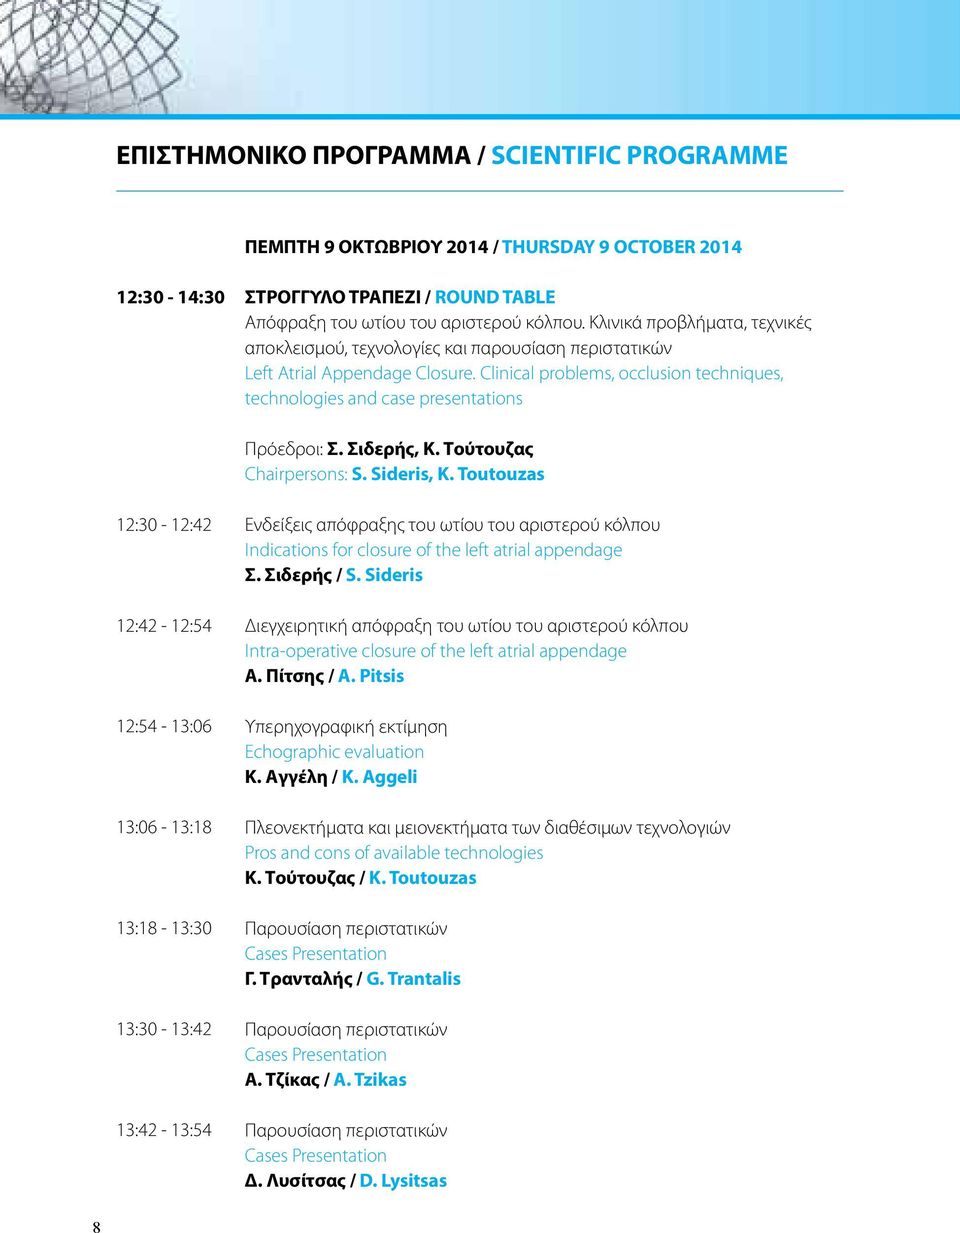 Clinical problems, occlusion techniques, technologies and case presentations Πρόεδροι: Σ. Σιδερής, Κ. Τούτουζας Chairpersons: S. Sideris, K.